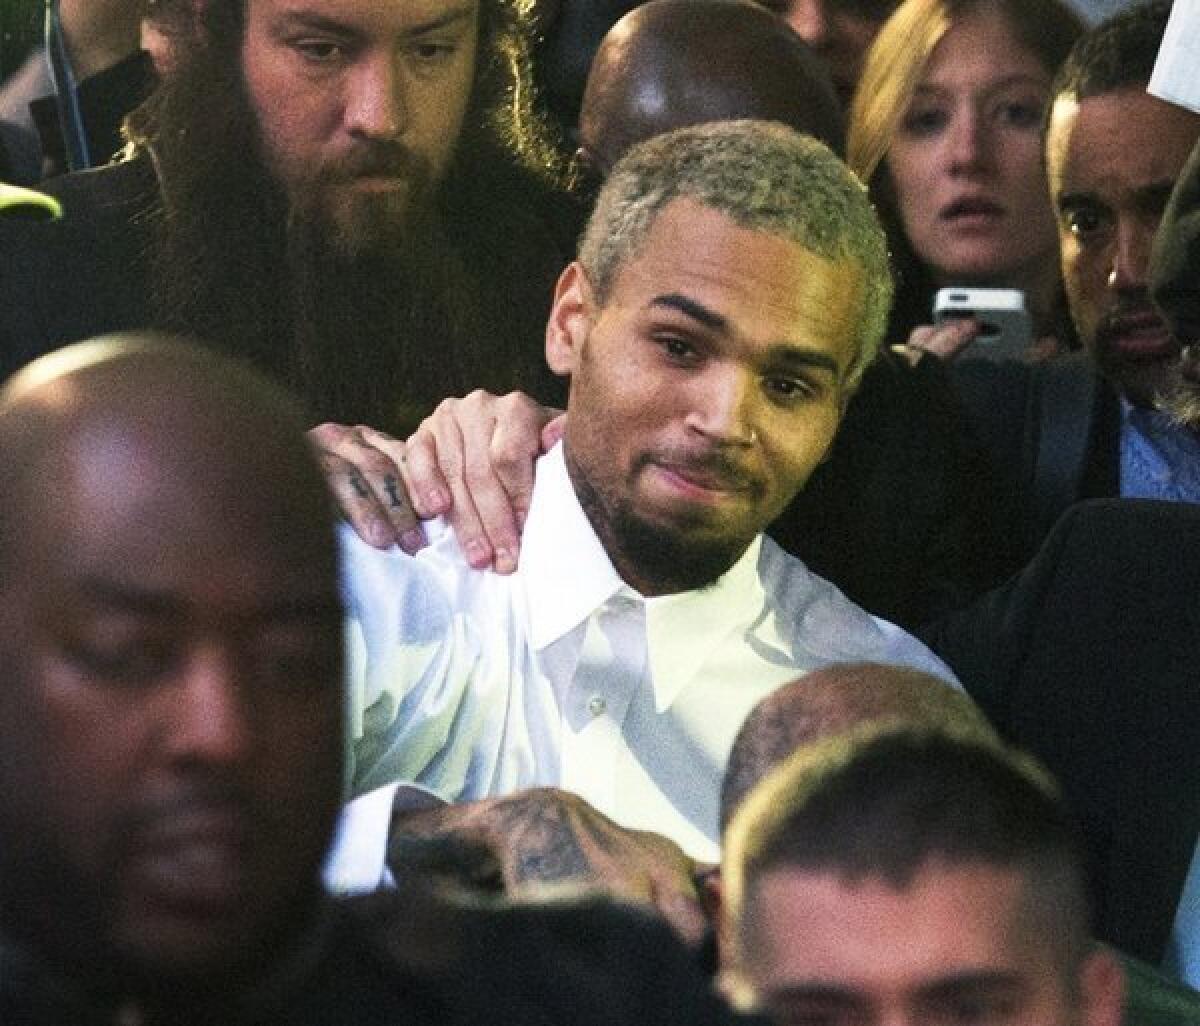 Singer Chris Brown departs the H. Carl Moultrie courthouse on Monday in Washington, D.C. A charge against the Grammy Award-winning R&B; singer has been reduced to a misdemeanor, and he was ordered released after his arrest Sunday following an altercation outside a Washington hotel.